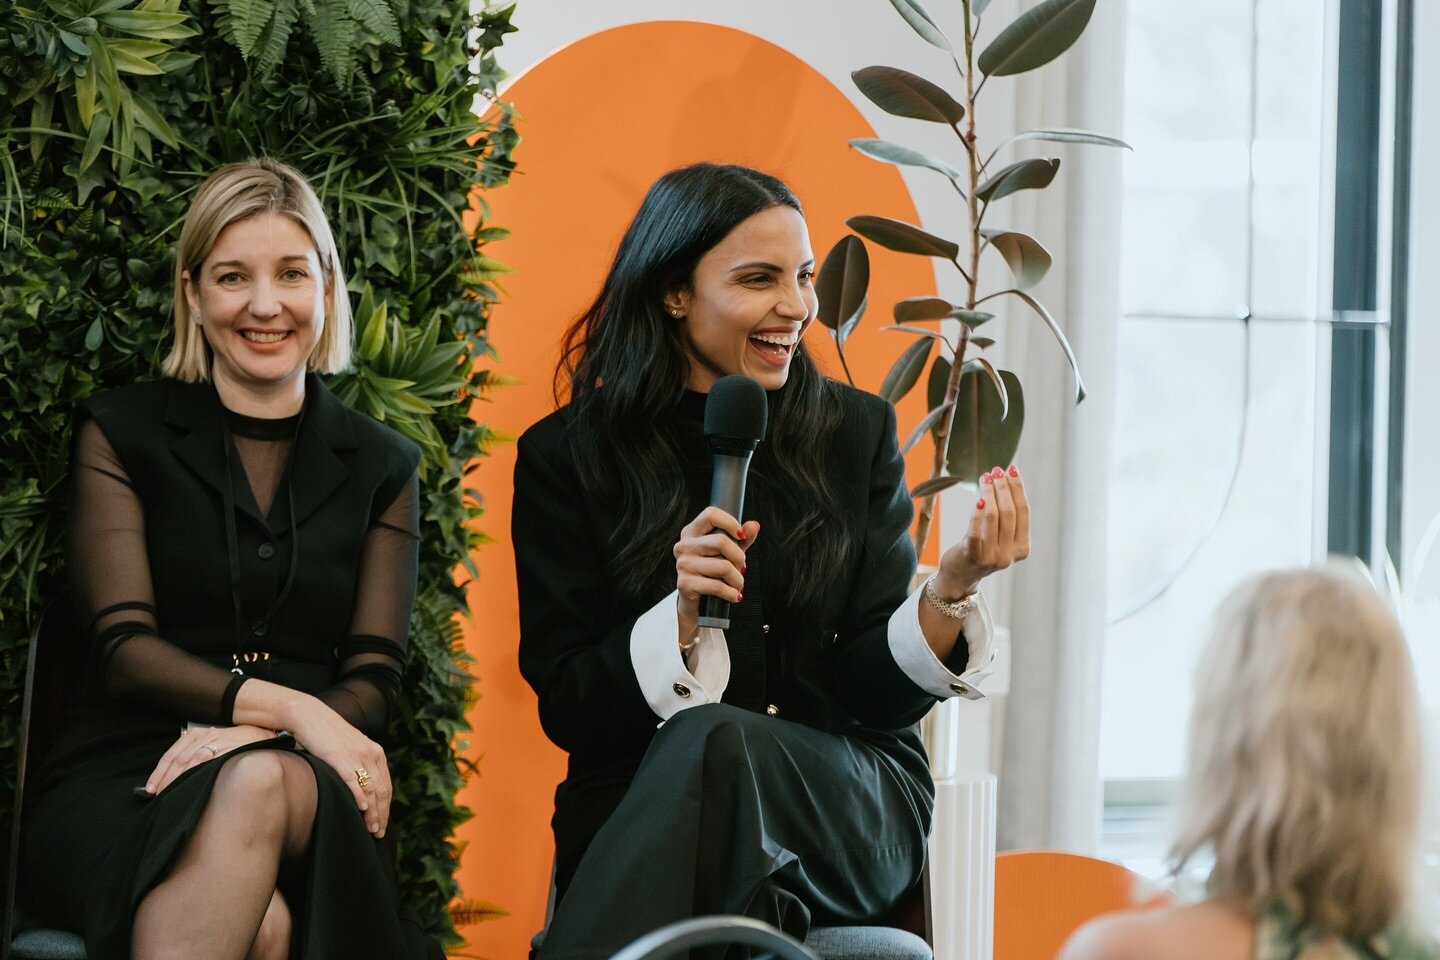 Trudi Procter (@bakermckenzieaustralia) and Ashima Chaudhary (@mastercardau) joined us for our Future Of Money panel to walk us through the future of digital currencies and what&rsquo;s needed for Australians to embrace them. The finance panel we all